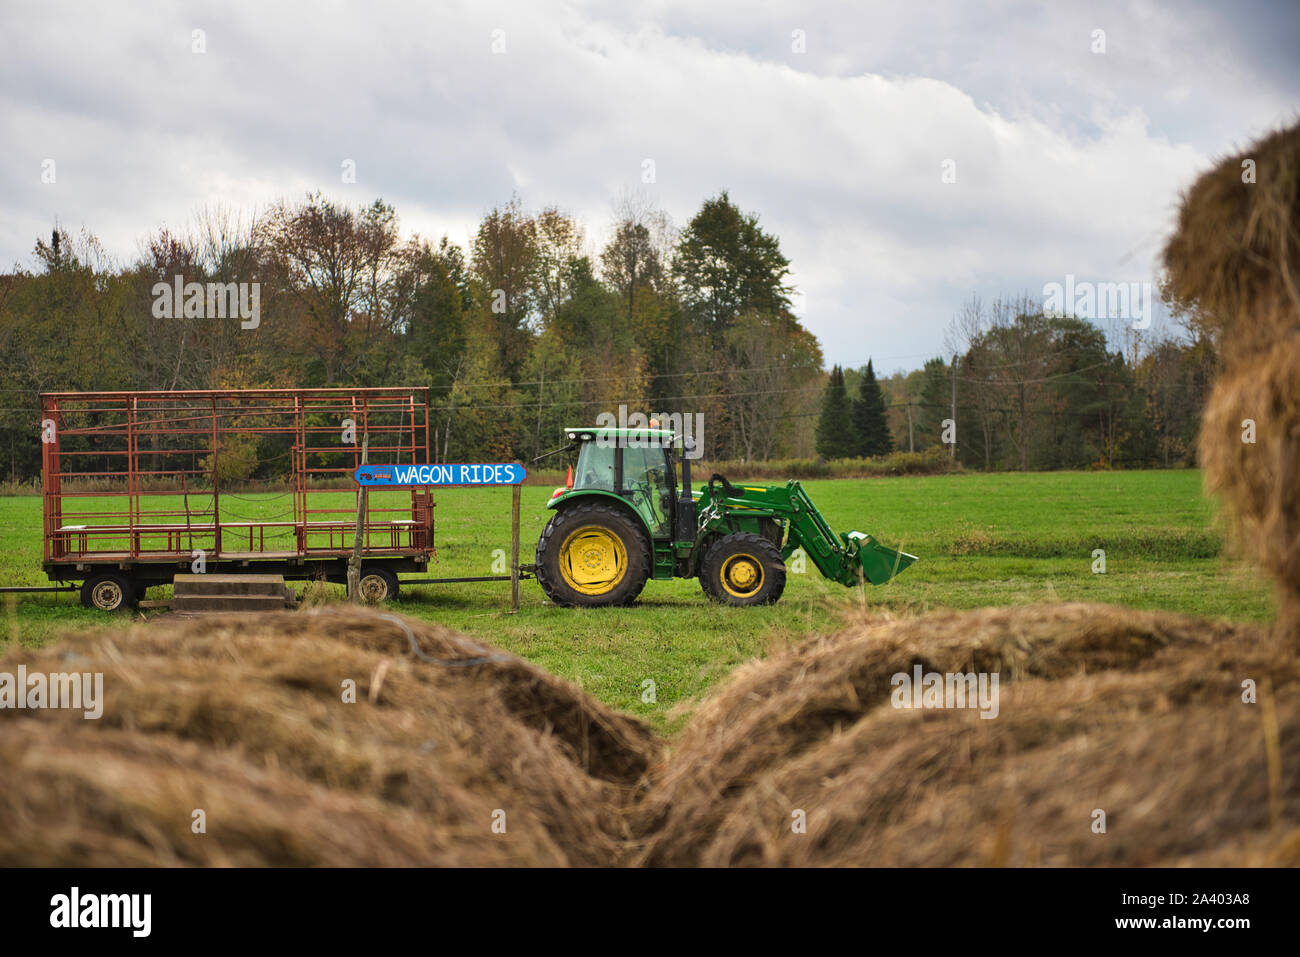 Wagon ride tractor waiting behind rolls of hay Stock Photo